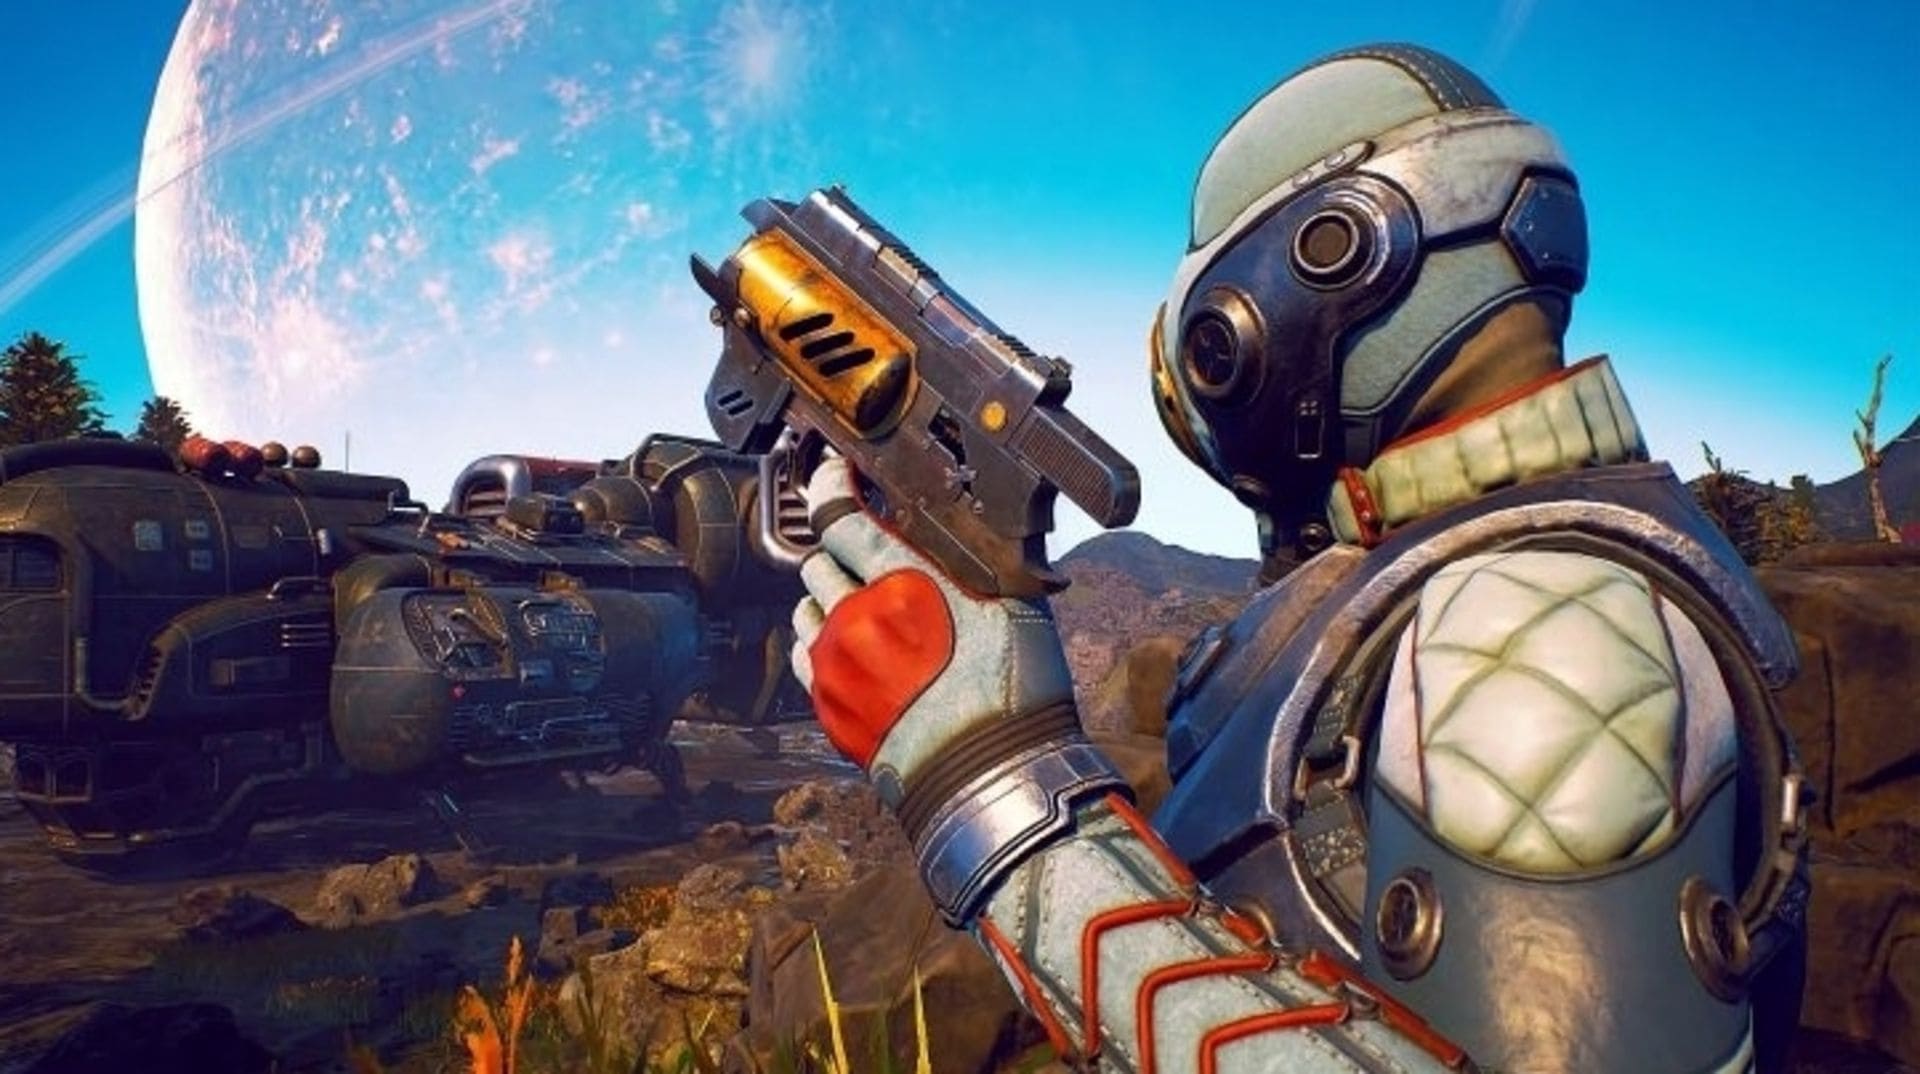 The Outer Worlds Is a Big RPG Success with Two Million Copies Shipped